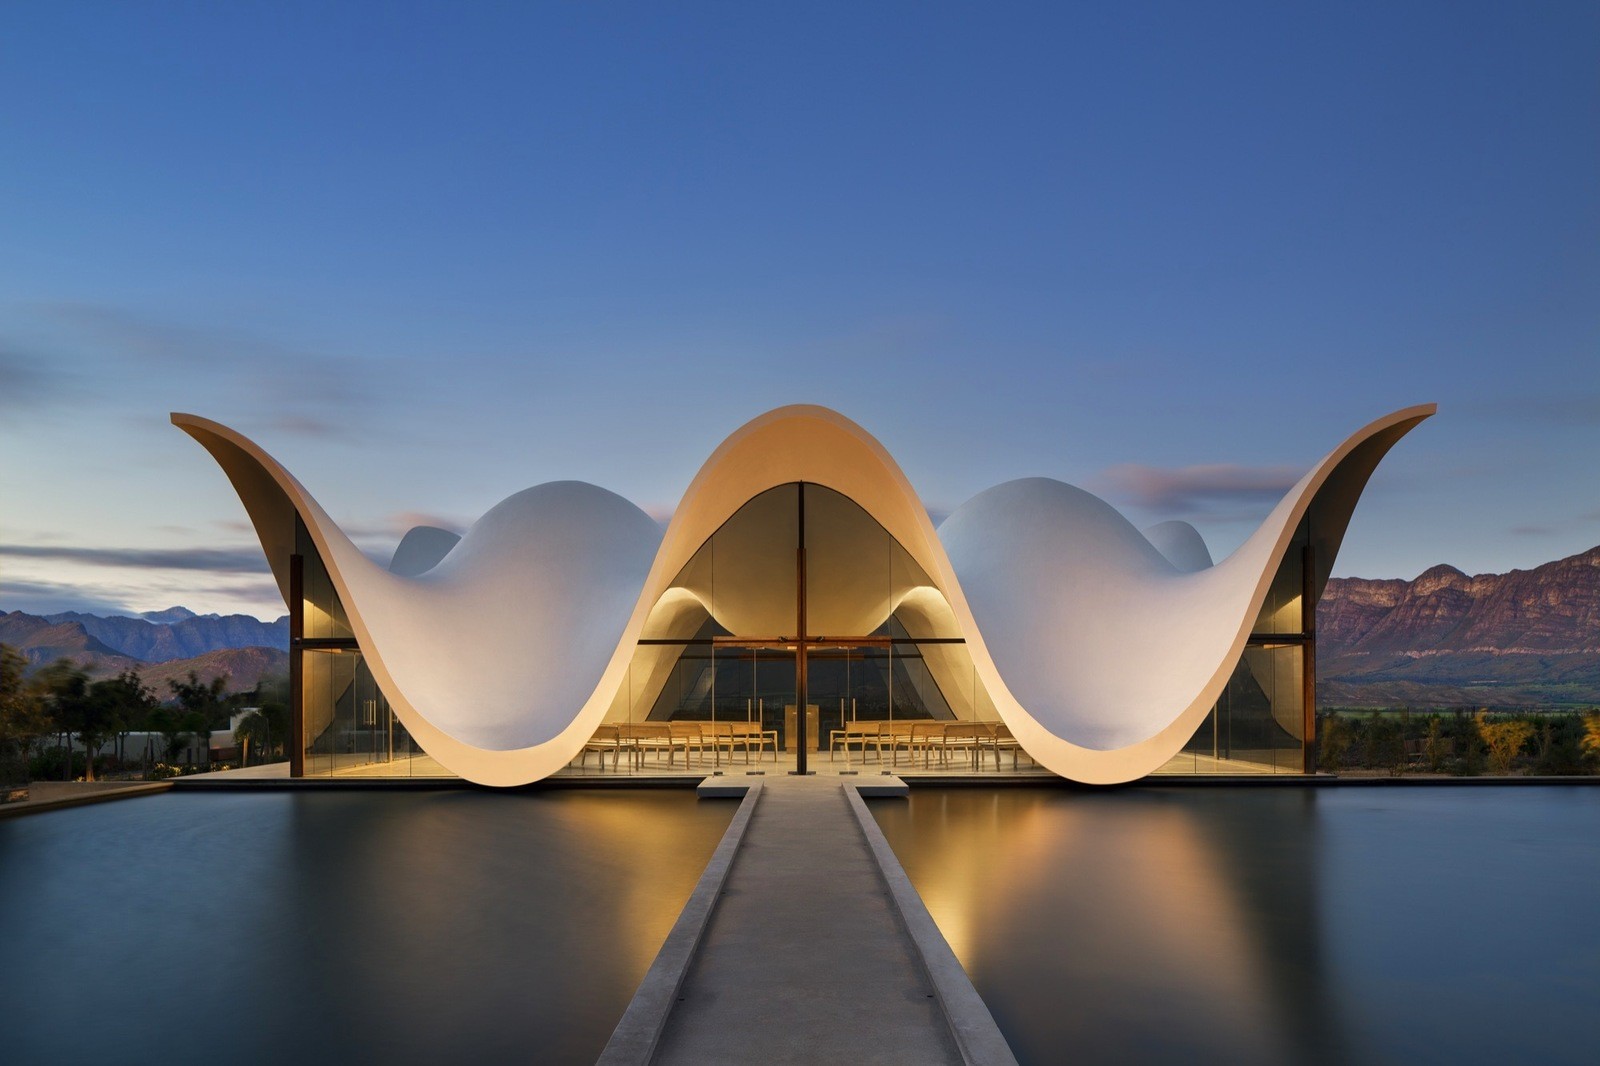  Boches Chapel in South Africa